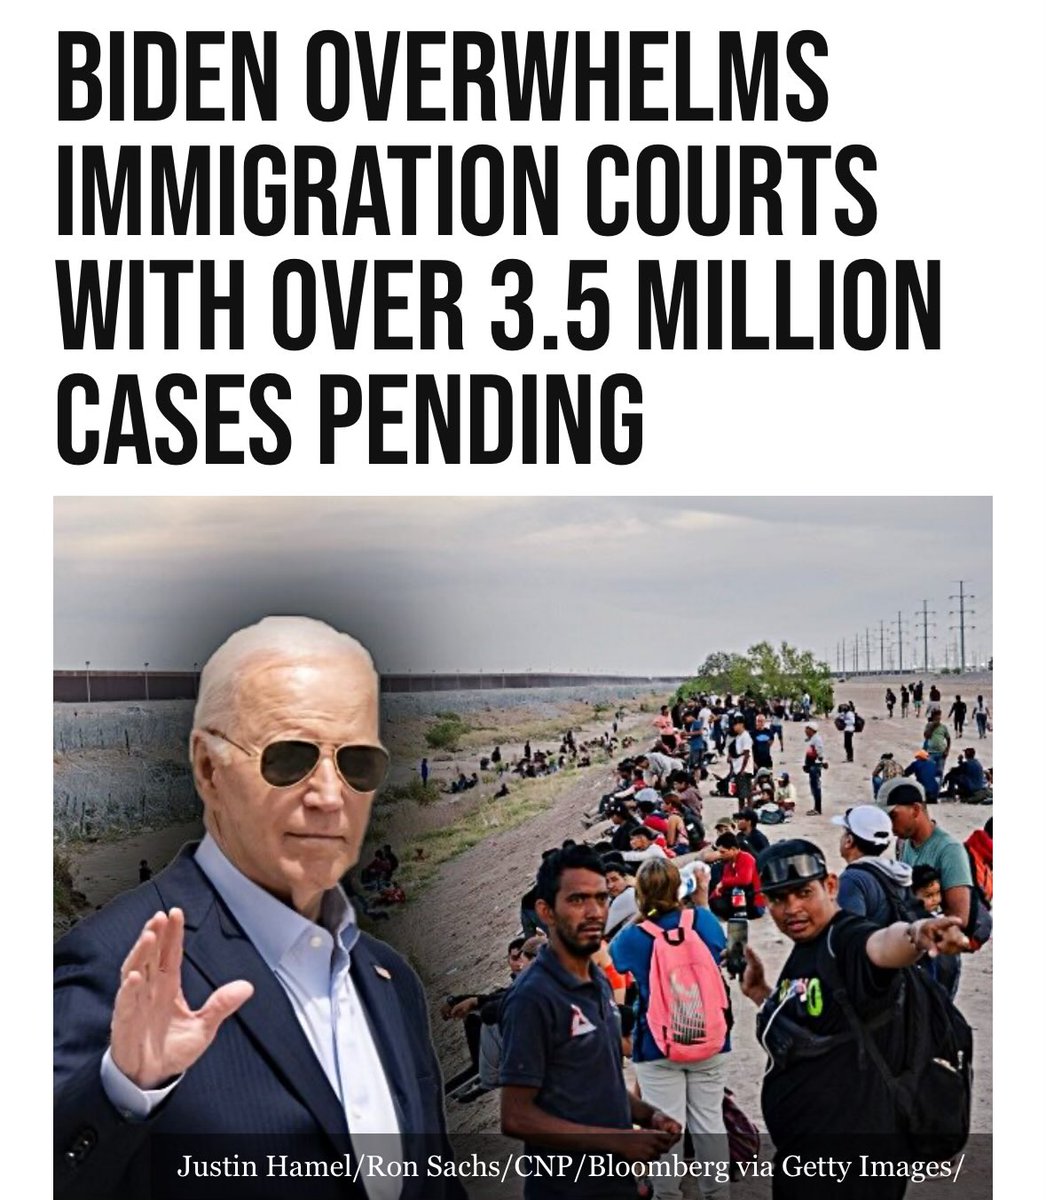 Our immigration courts are overwhelmed by a backlog of over 3.5 million cases under @JoeBiden. My border plan calls for the hiring of hundreds – thousands, if necessary – of new judges to hear asylum claims & clear the enormous number of cases that have stacked up under Biden &…